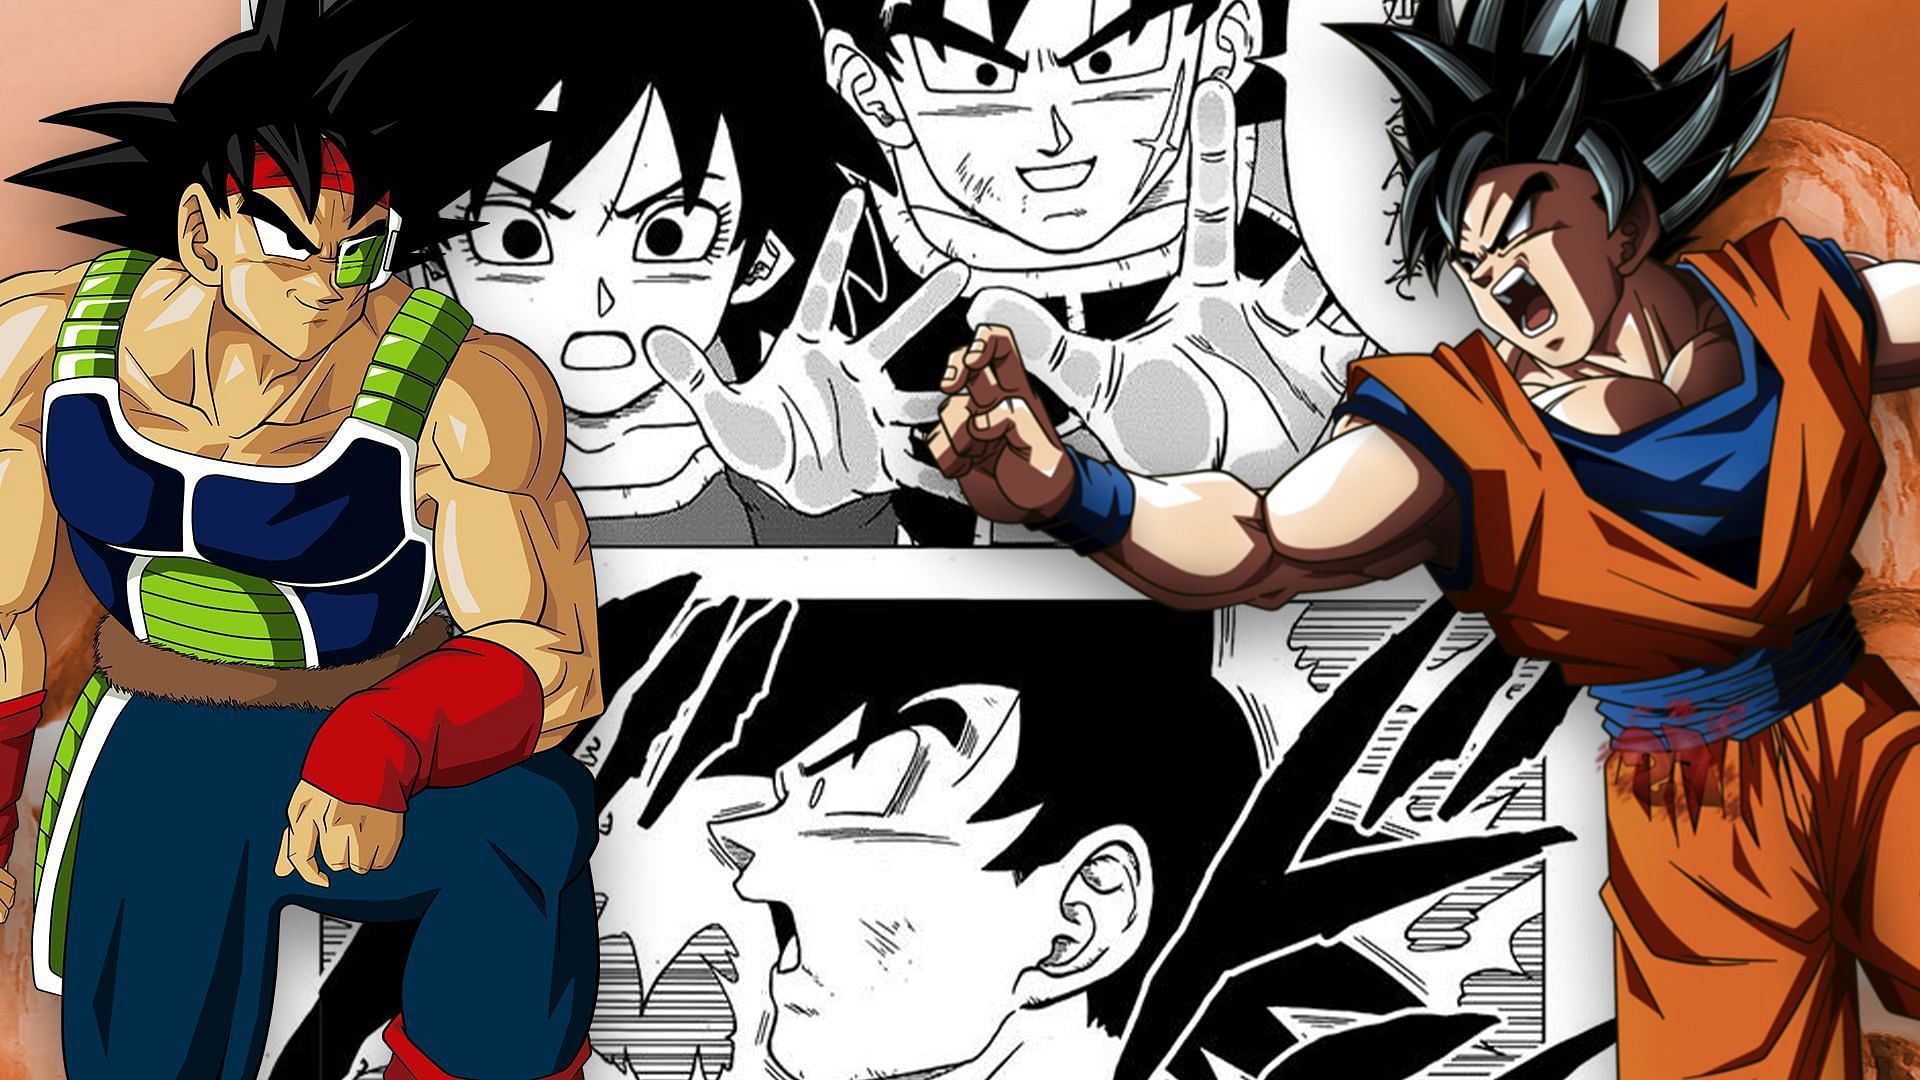 Goku uncovers a certain memory in the upcoming Dragon Ball Super issue (Image via Sportskeeda)